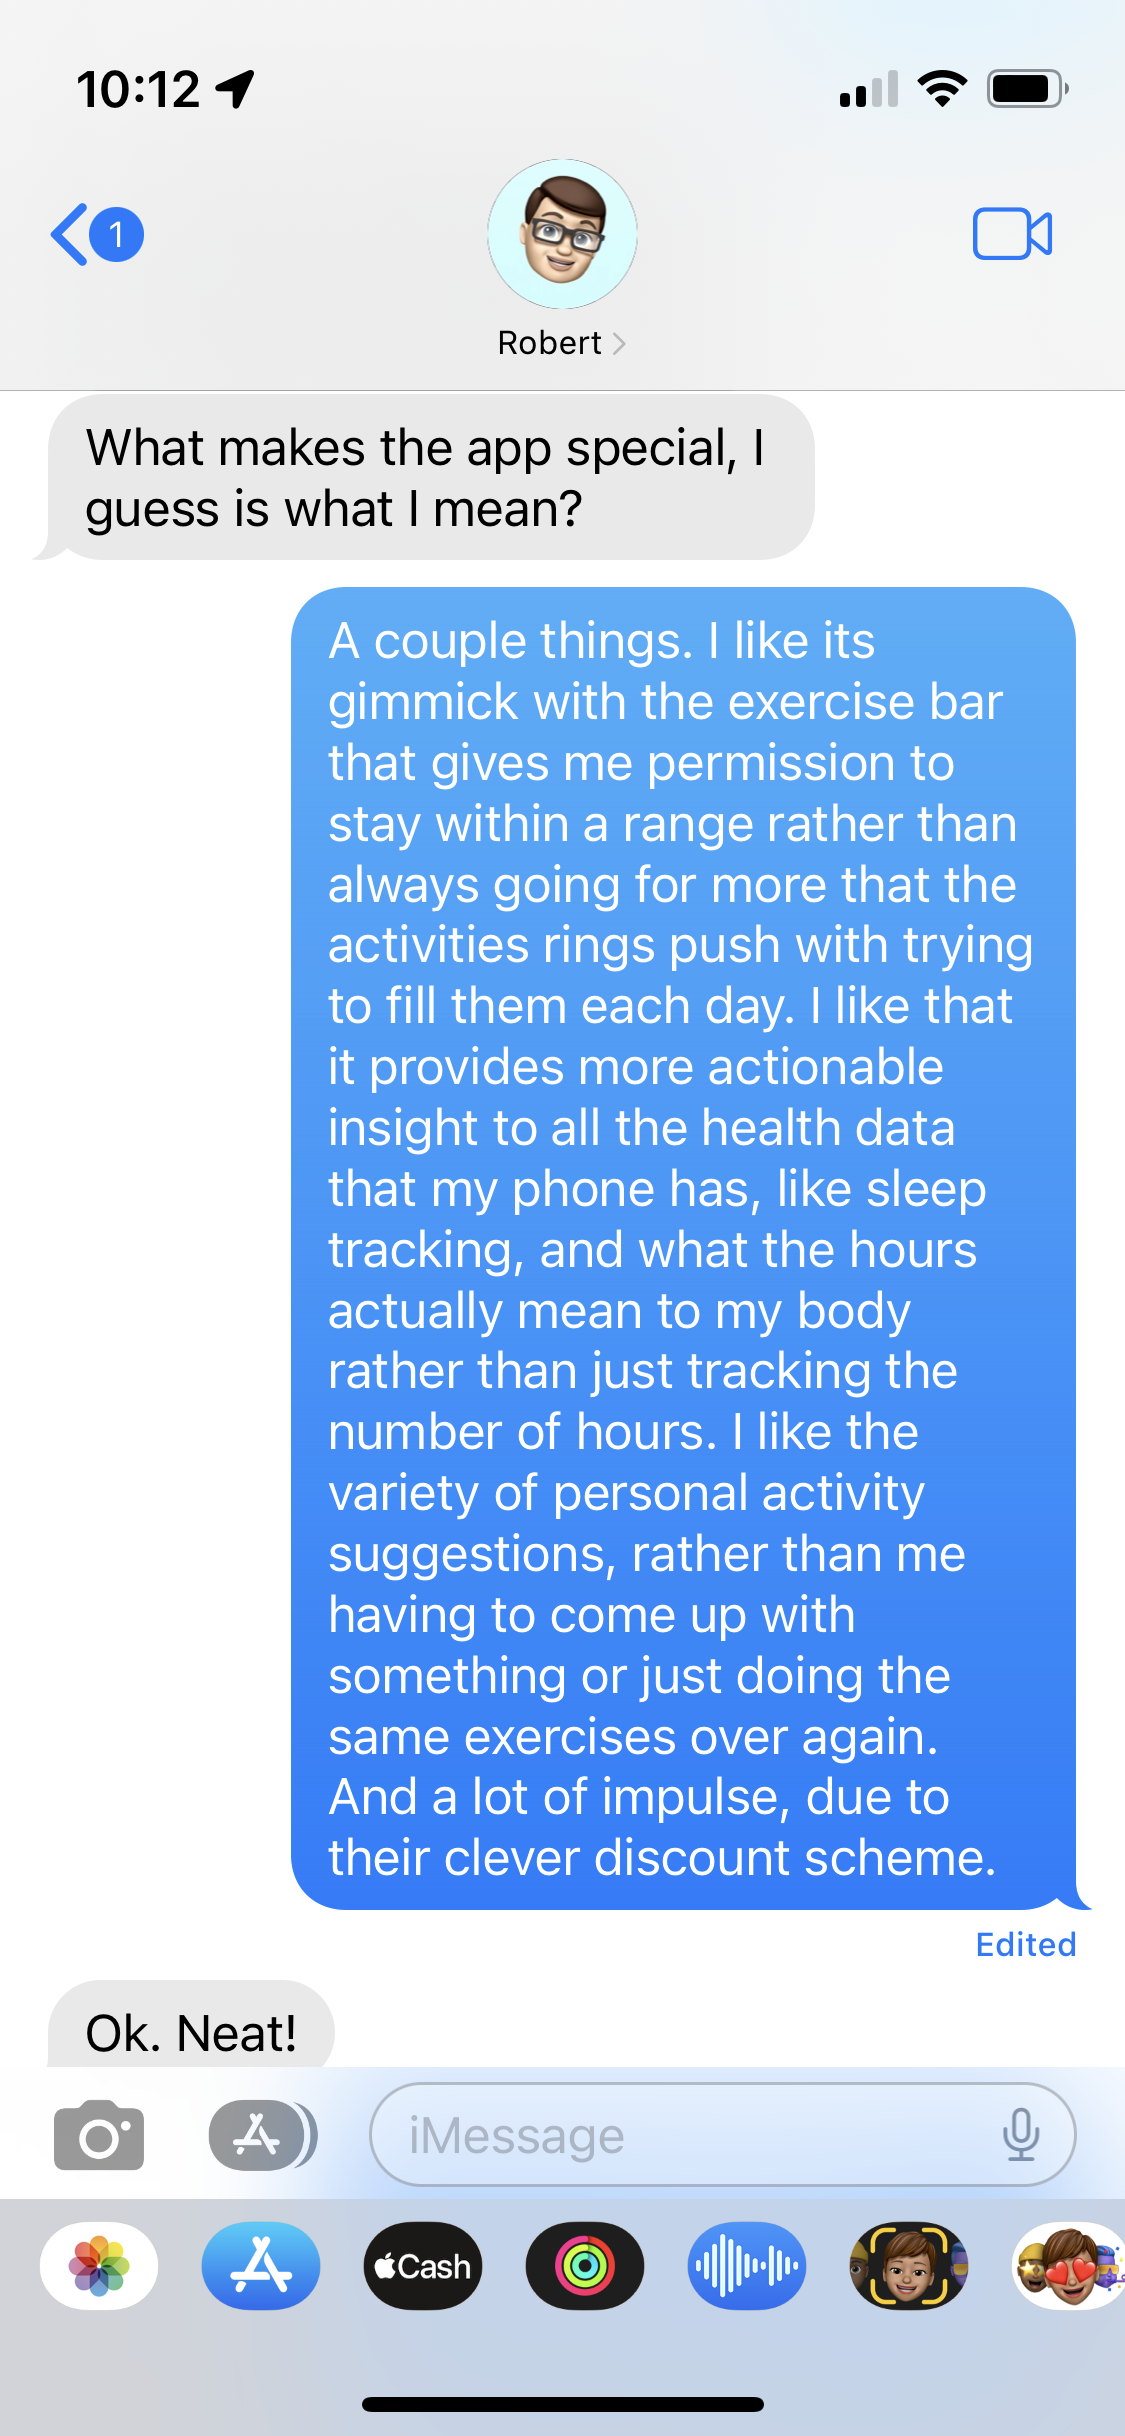 An iMessage conversation asking what made Gentler Streak special. The response: A couple things. I like its gimmick with the exercise bar that gives me permission to stay within a range rather than always going for more that the activities rings push with trying to fill them each day. I like that it provides more actionable insight to all the health data that my phone has, like sleep tracking, and what the hours actually mean to my body rather than just tracking the number of hours. I like the variety of personal activity suggestions, rather than me having to come up with something or just doing the same exercises over again. And a lot of impulse, due to their clever discount scheme.”